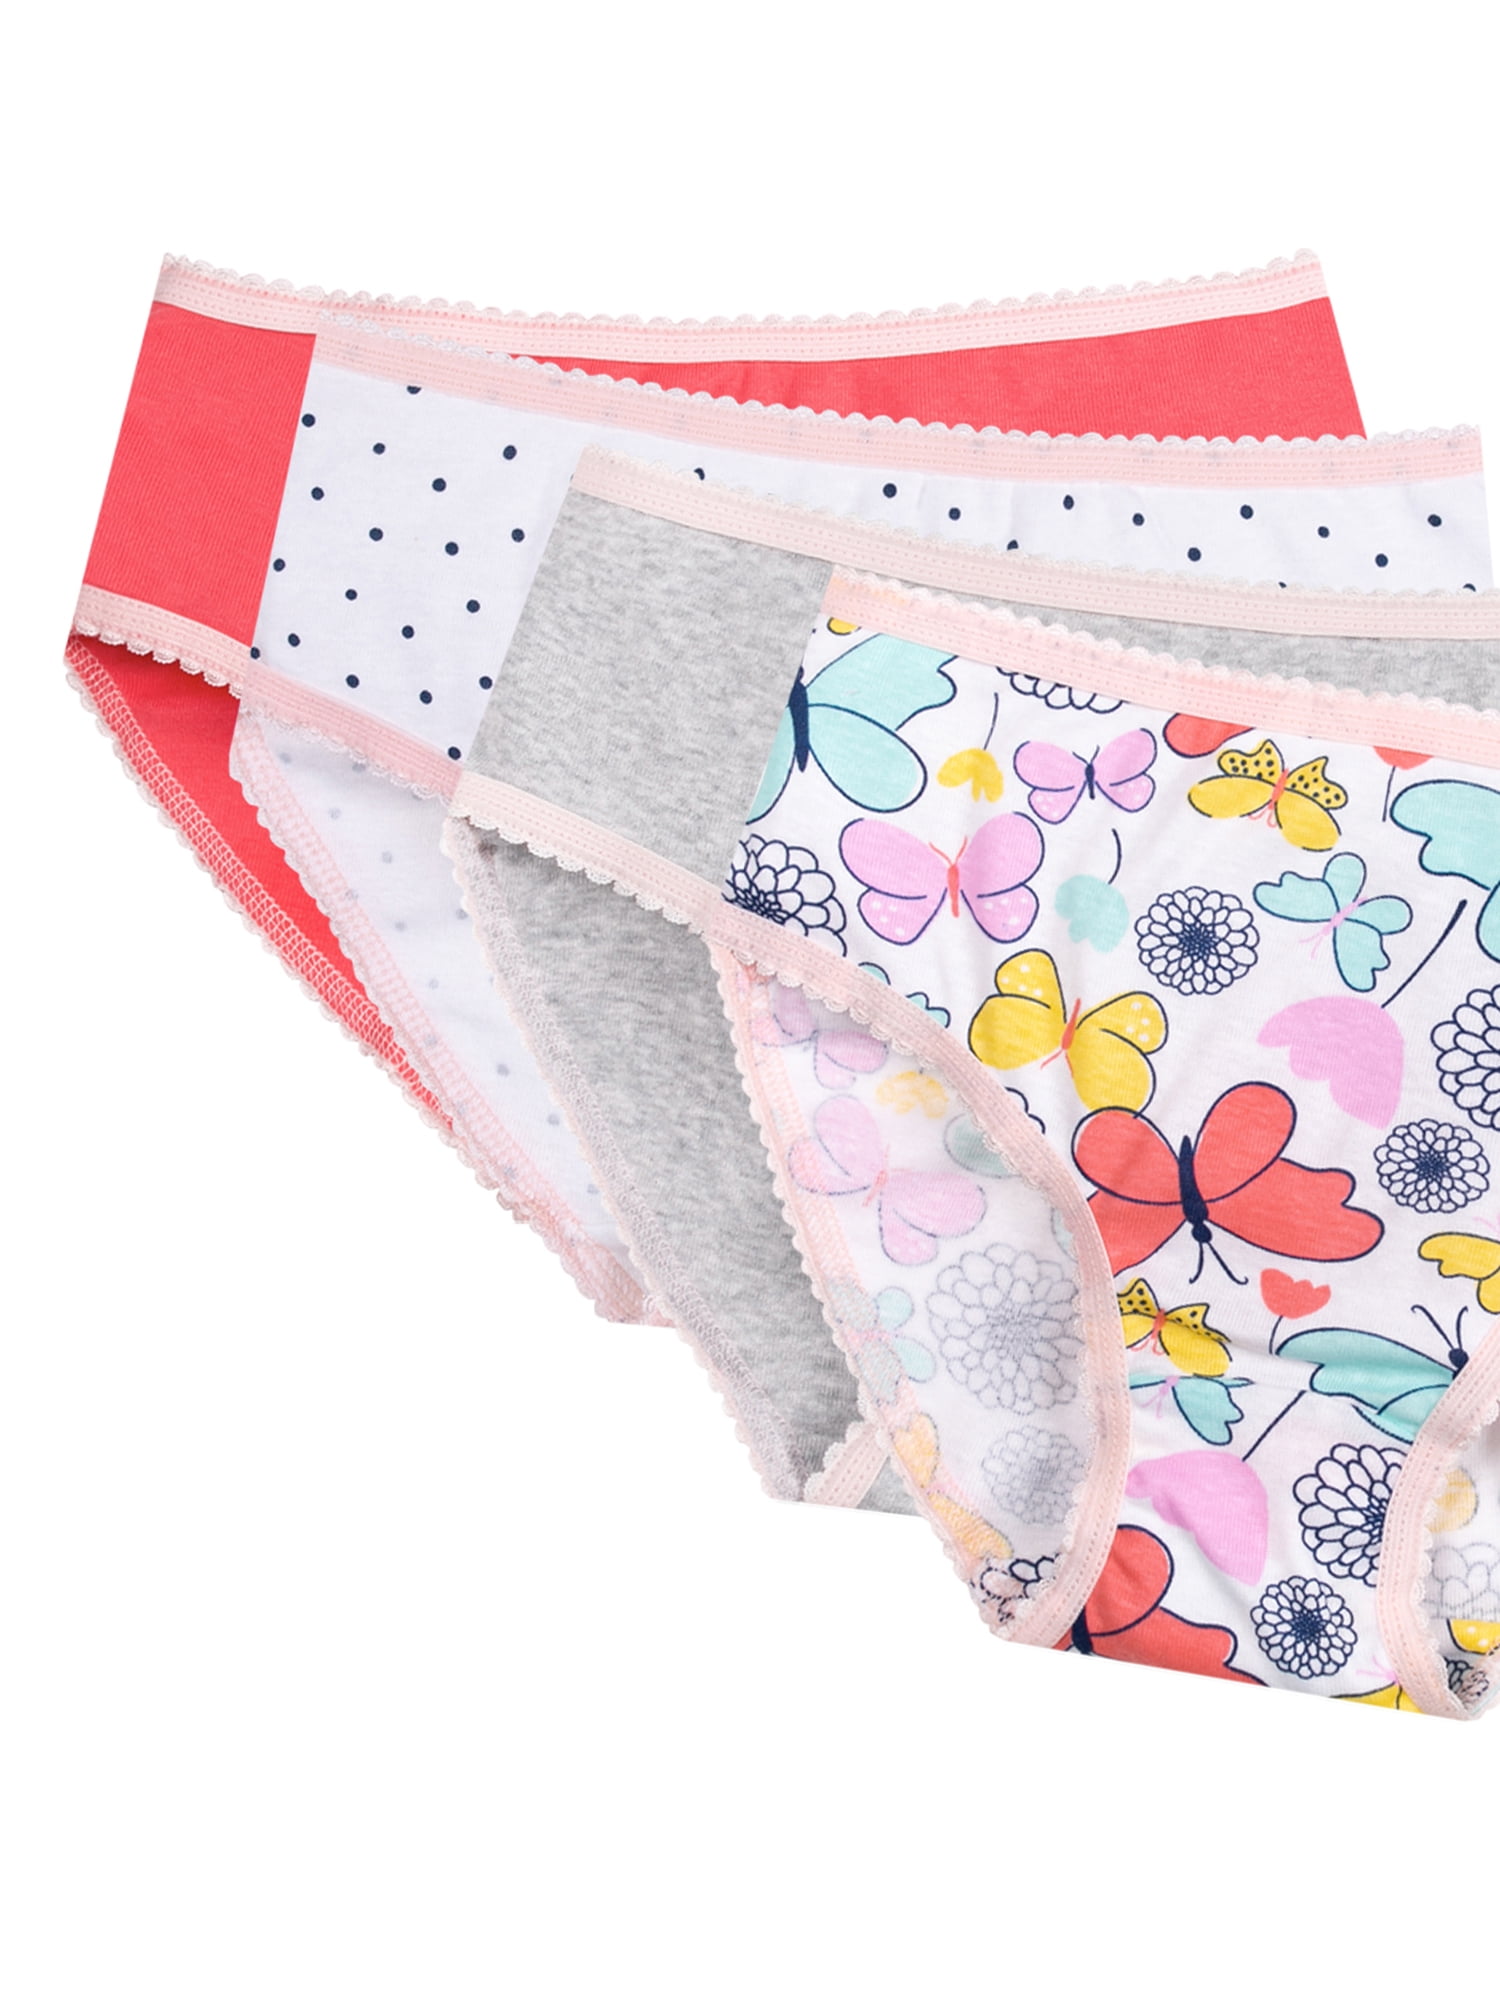 24 Pieces Girl's Underwear 5-Packs By 1000% Cute - Sizes 4-12/14 - Assorted  Styles - Girls Underwear and Pajamas